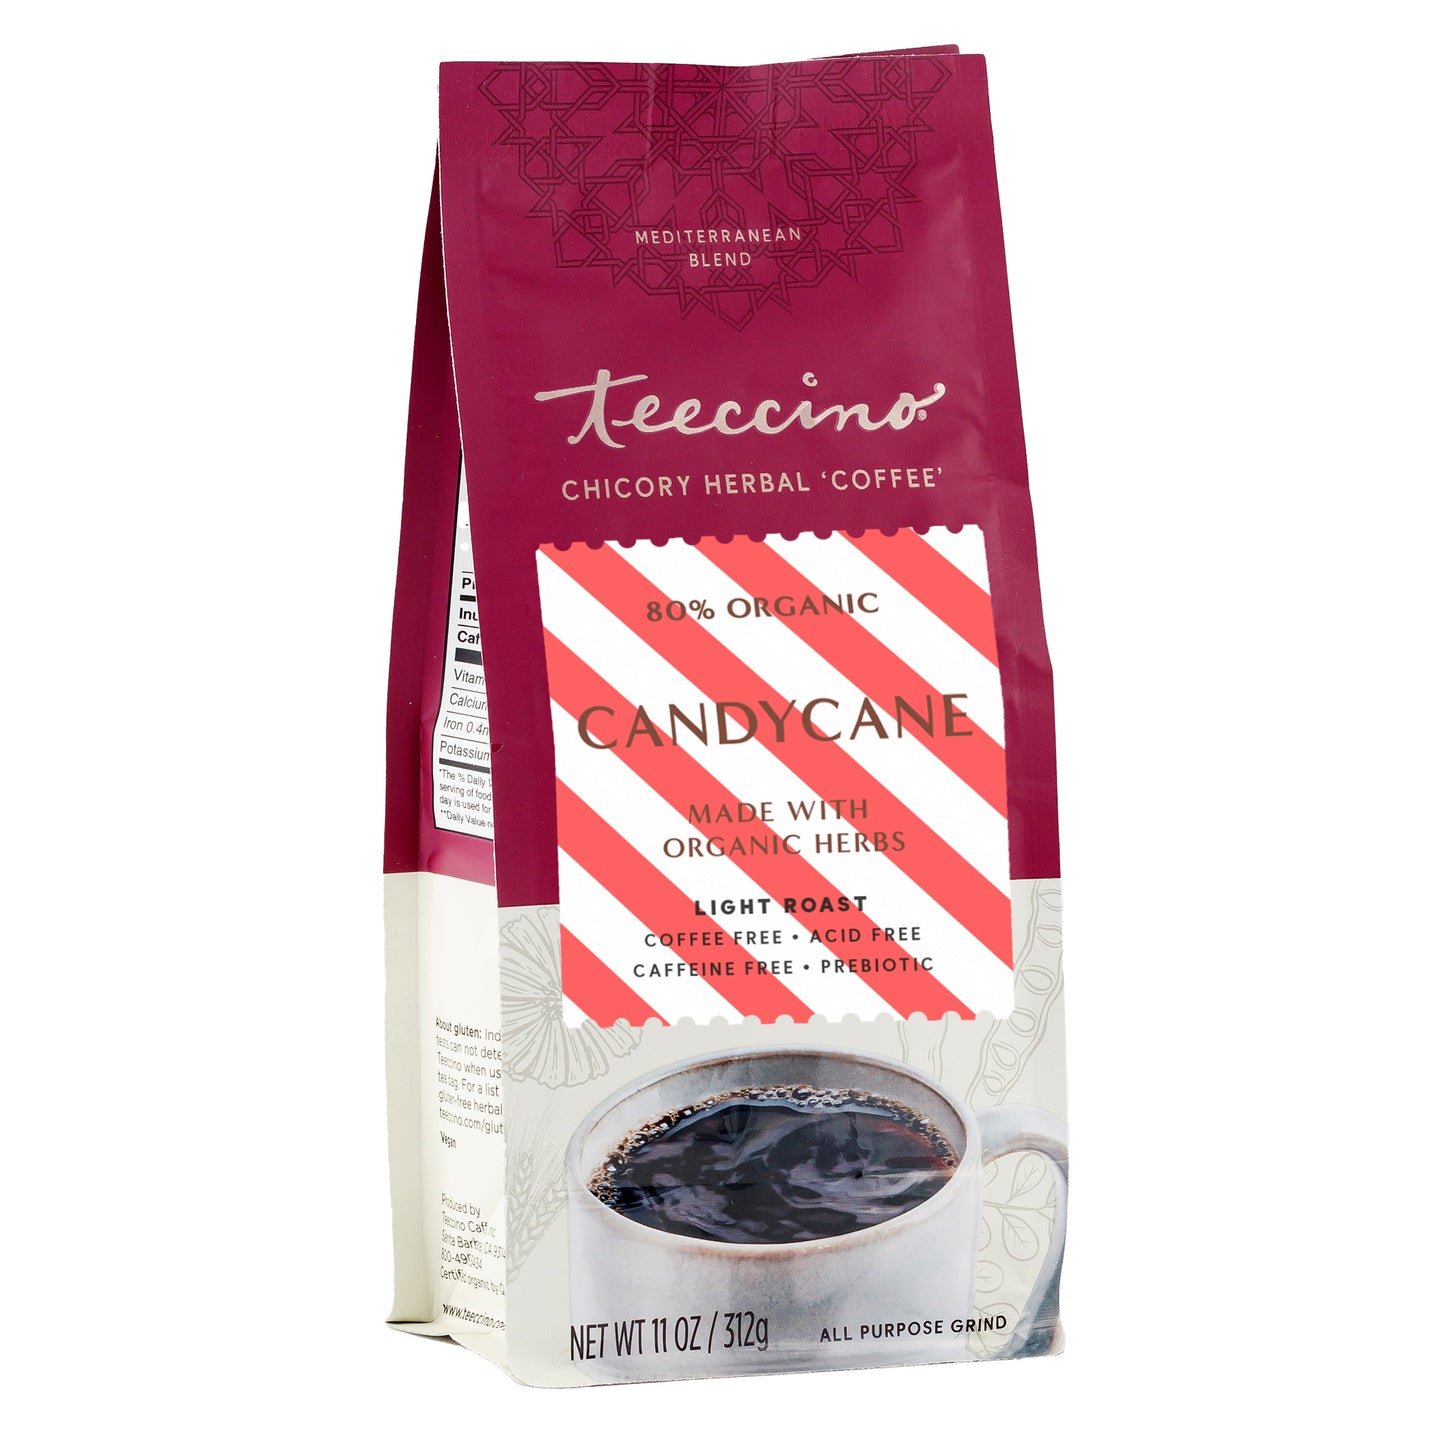 Candy Cane Chicory Herbal Coffee